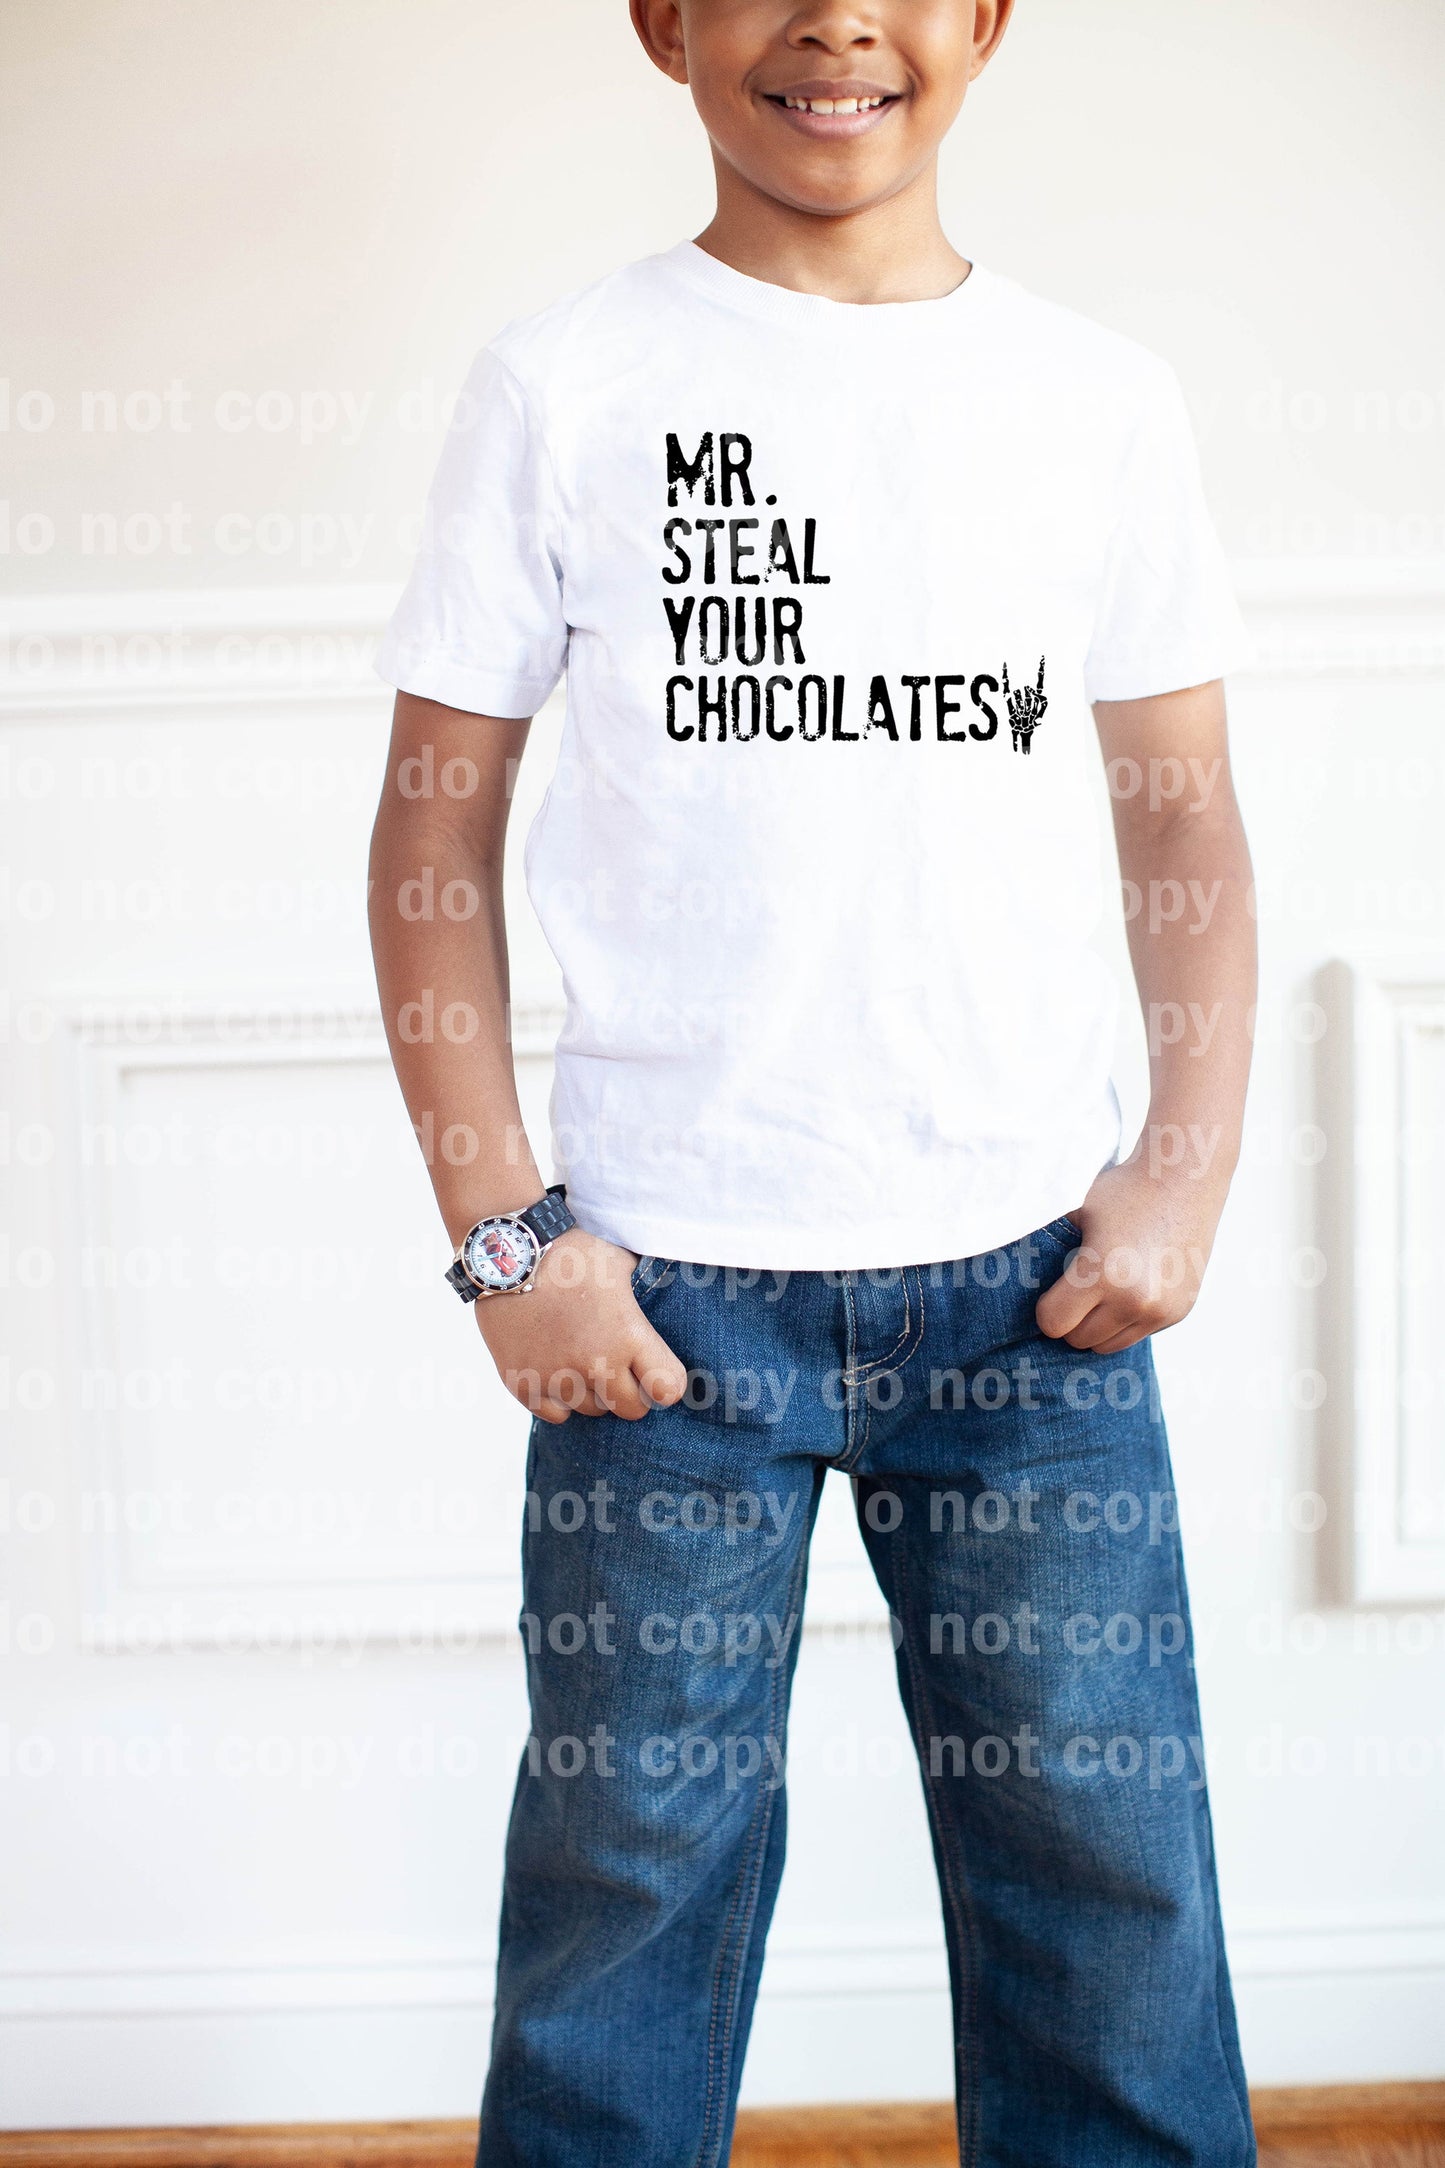 Mr. Steal Your Chocolates Black/White Dream Print or Sublimation Print